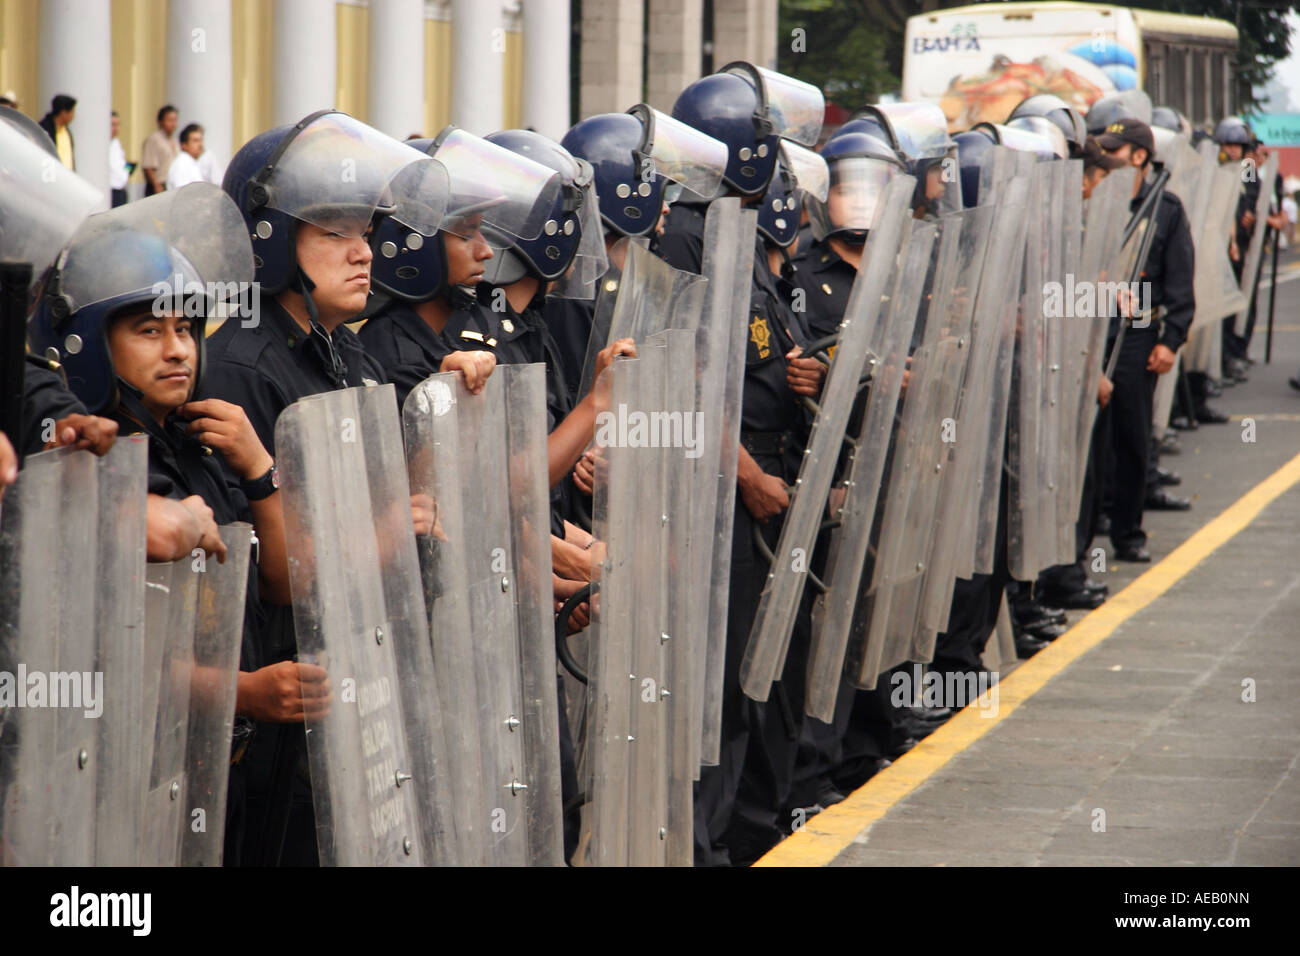 A line of Mexican police officers in riot gear in the city of Xalapa (Jalapa), Veracruz, Mexico. Stock Photo